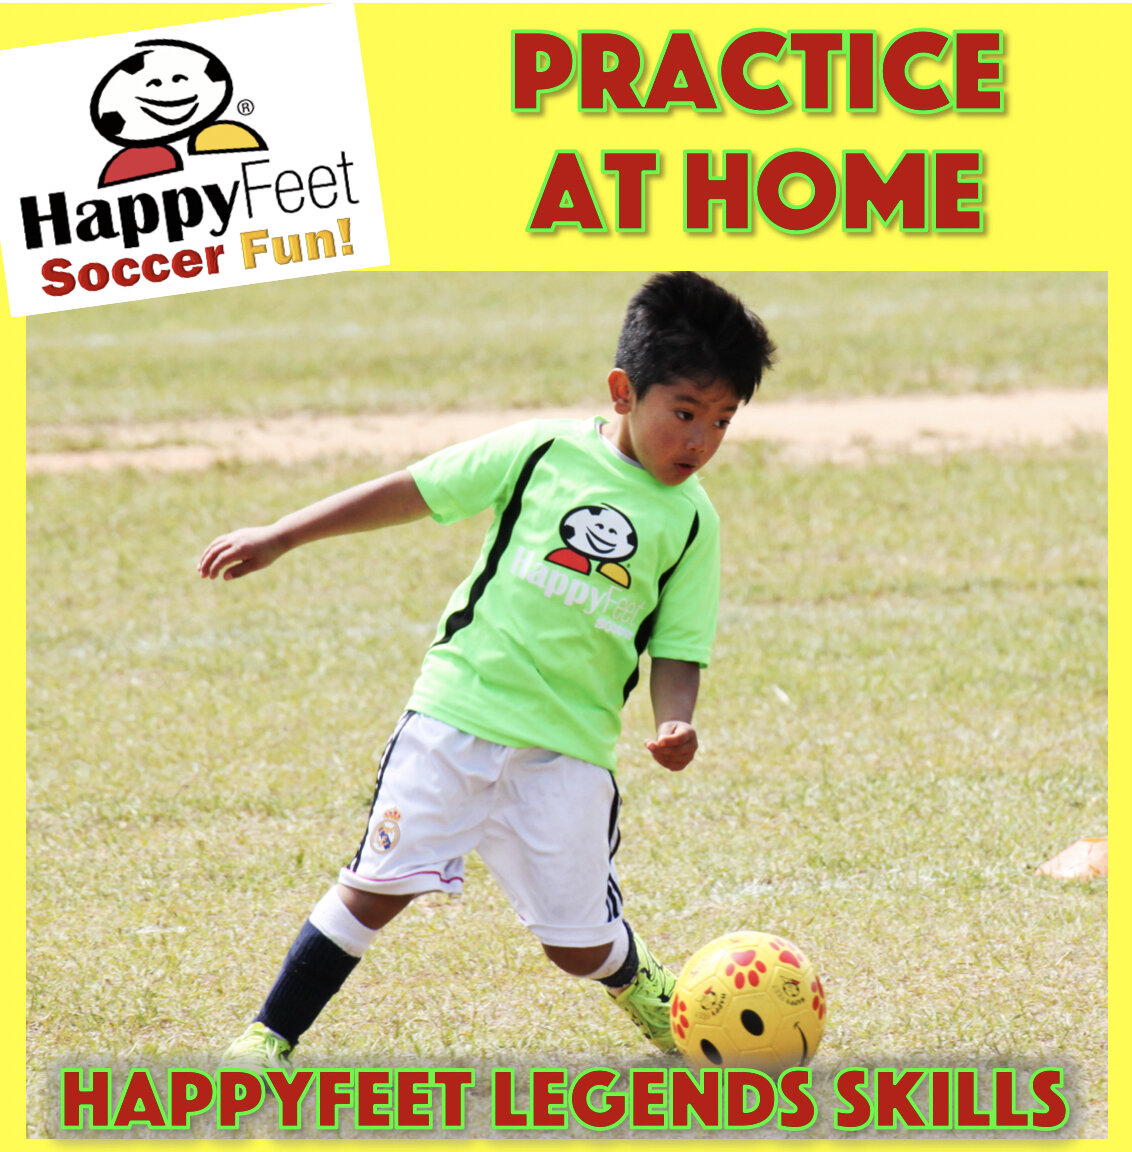 Practice Your Skills at Home